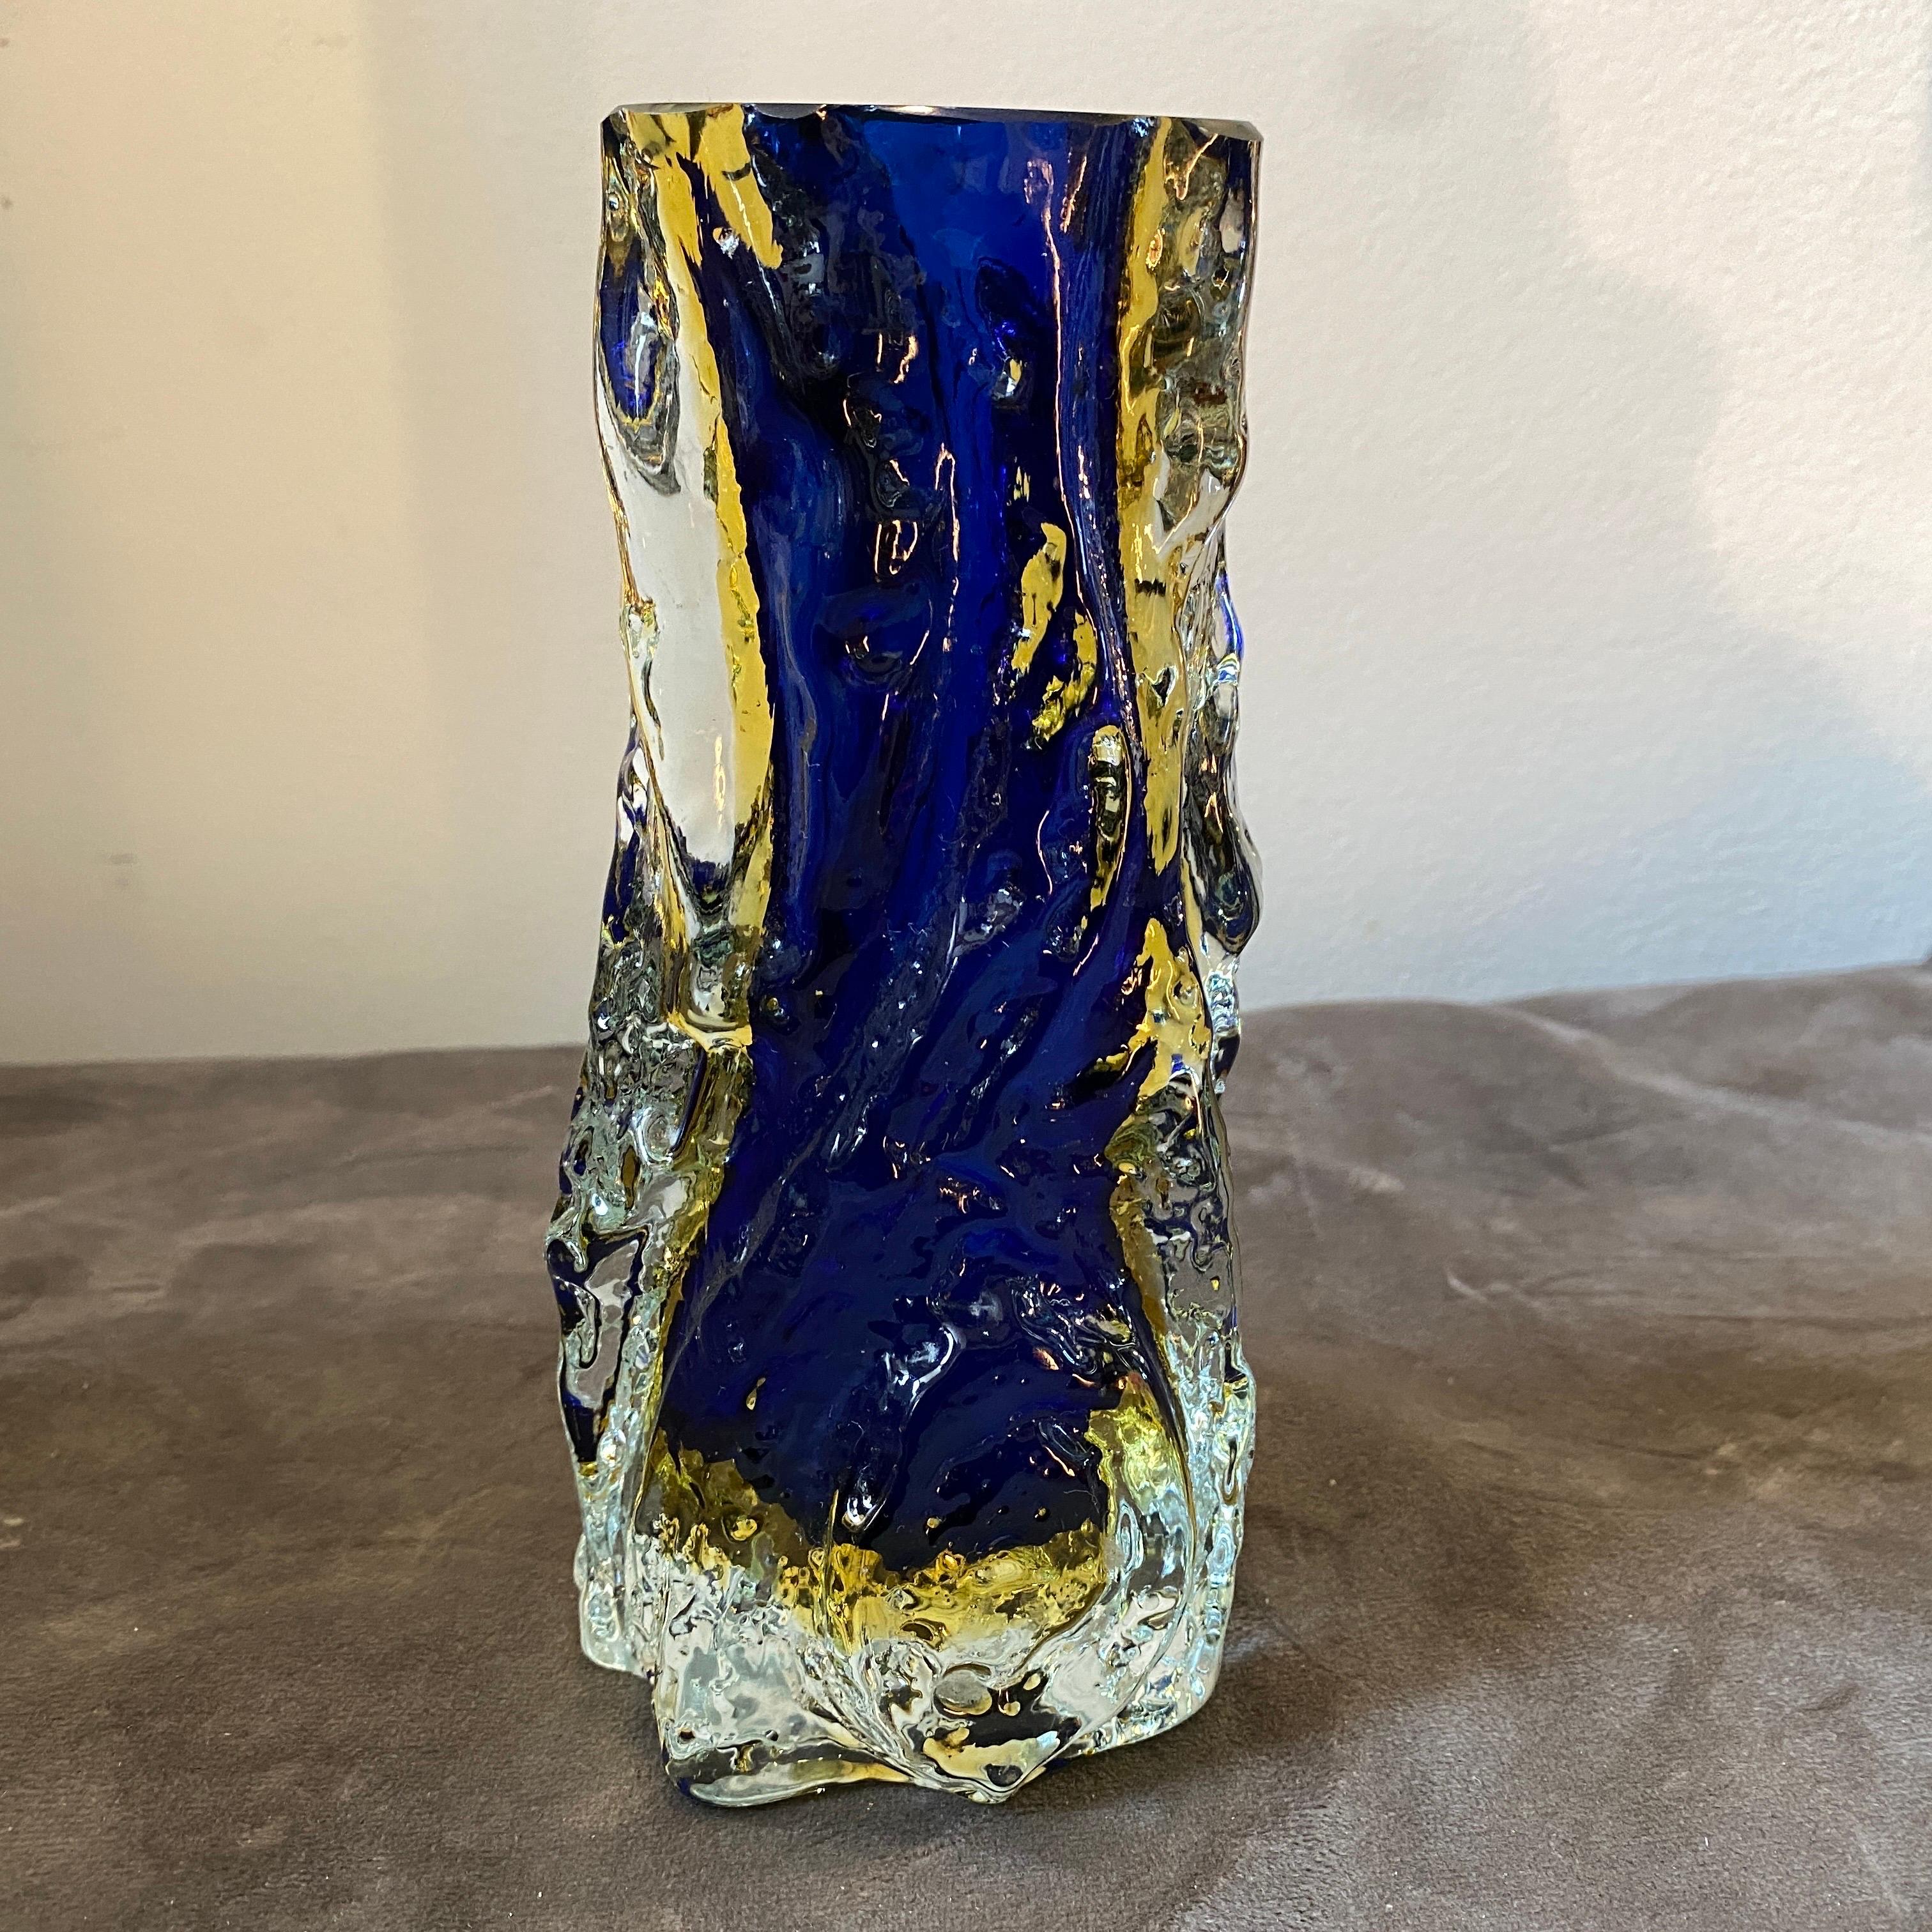 Modern 1970s Blue and Yellow Sommerso Murano Glass Vase by Mandruzzato